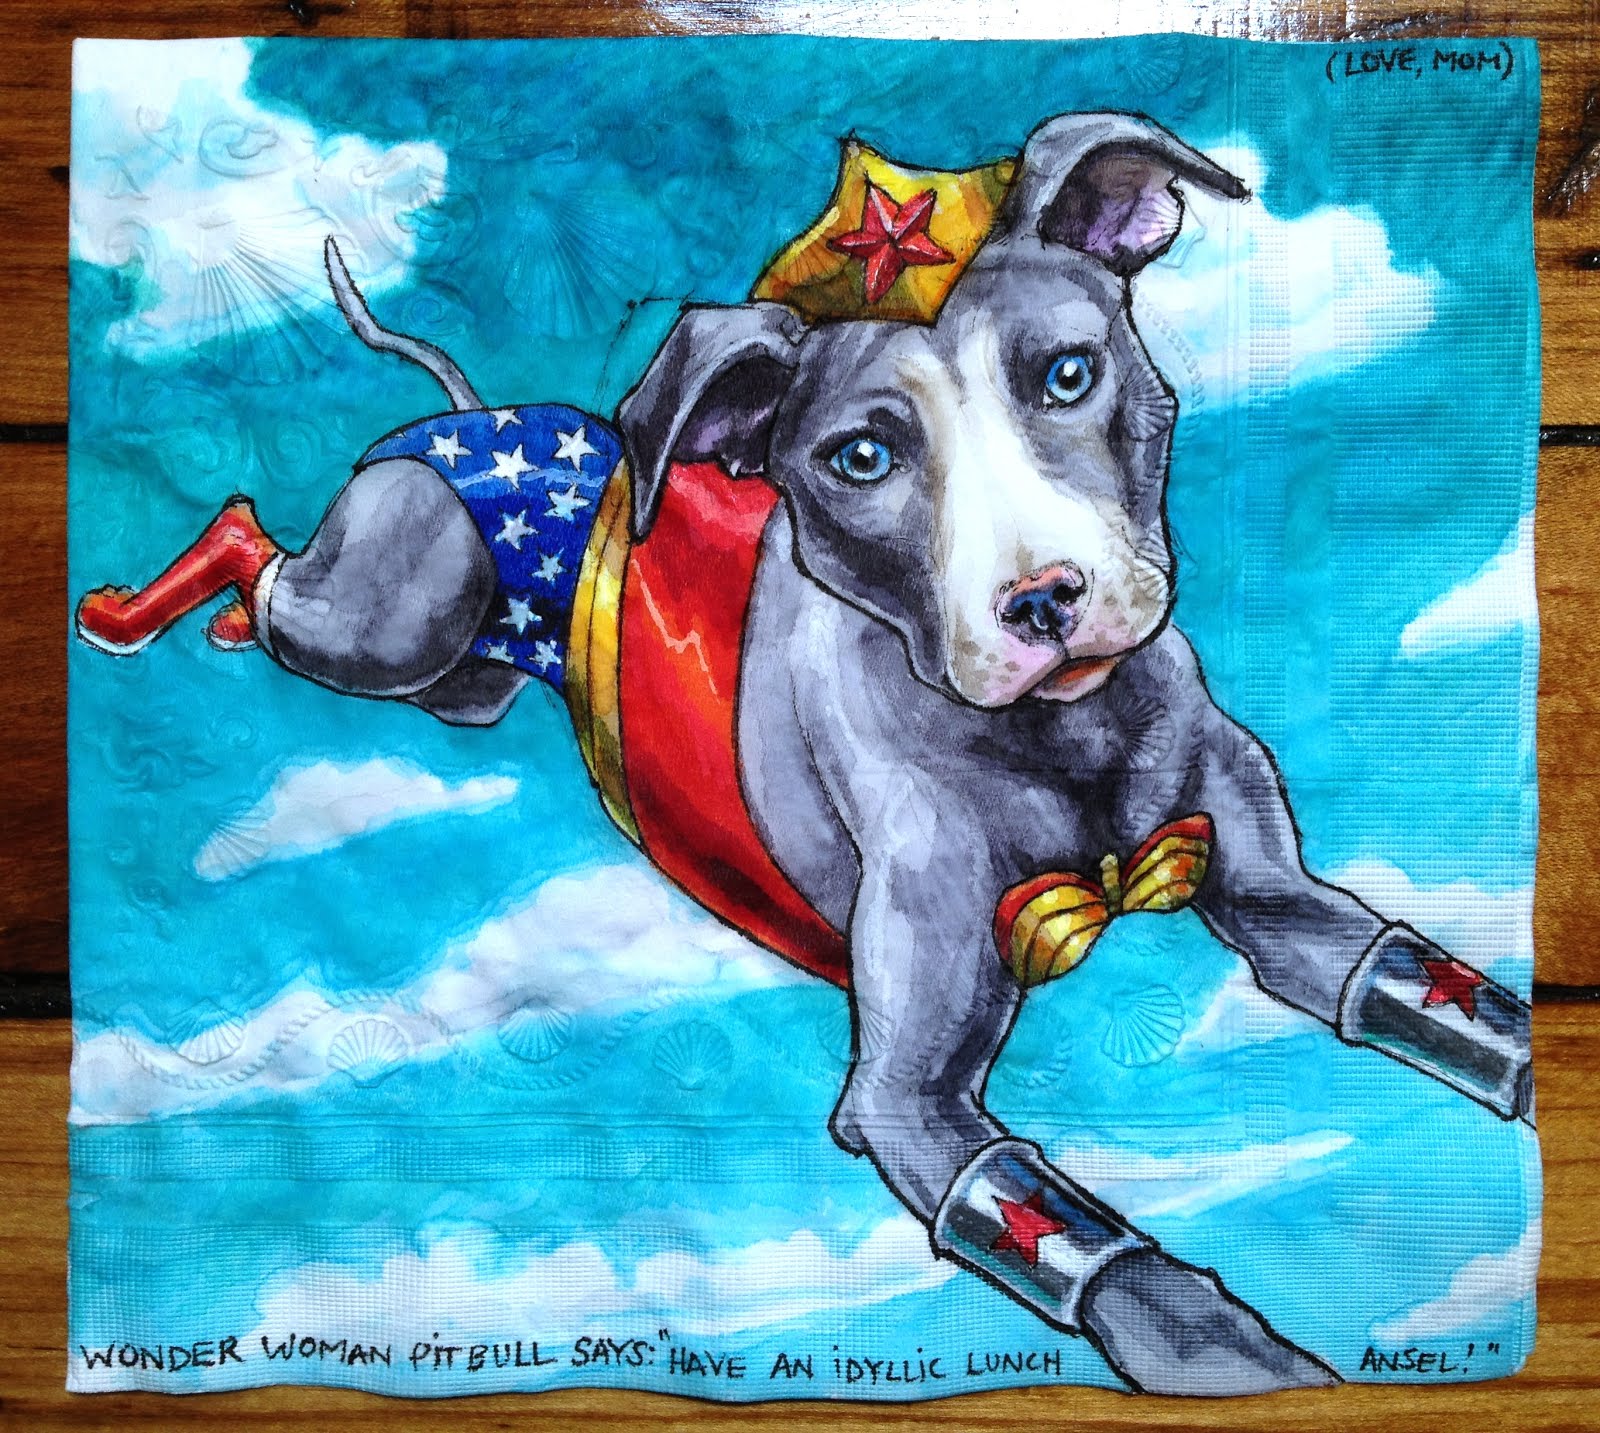 painting - Love, Moh Wonder Woman Pit Bull Says Have An Idyllic Lunch Ansel